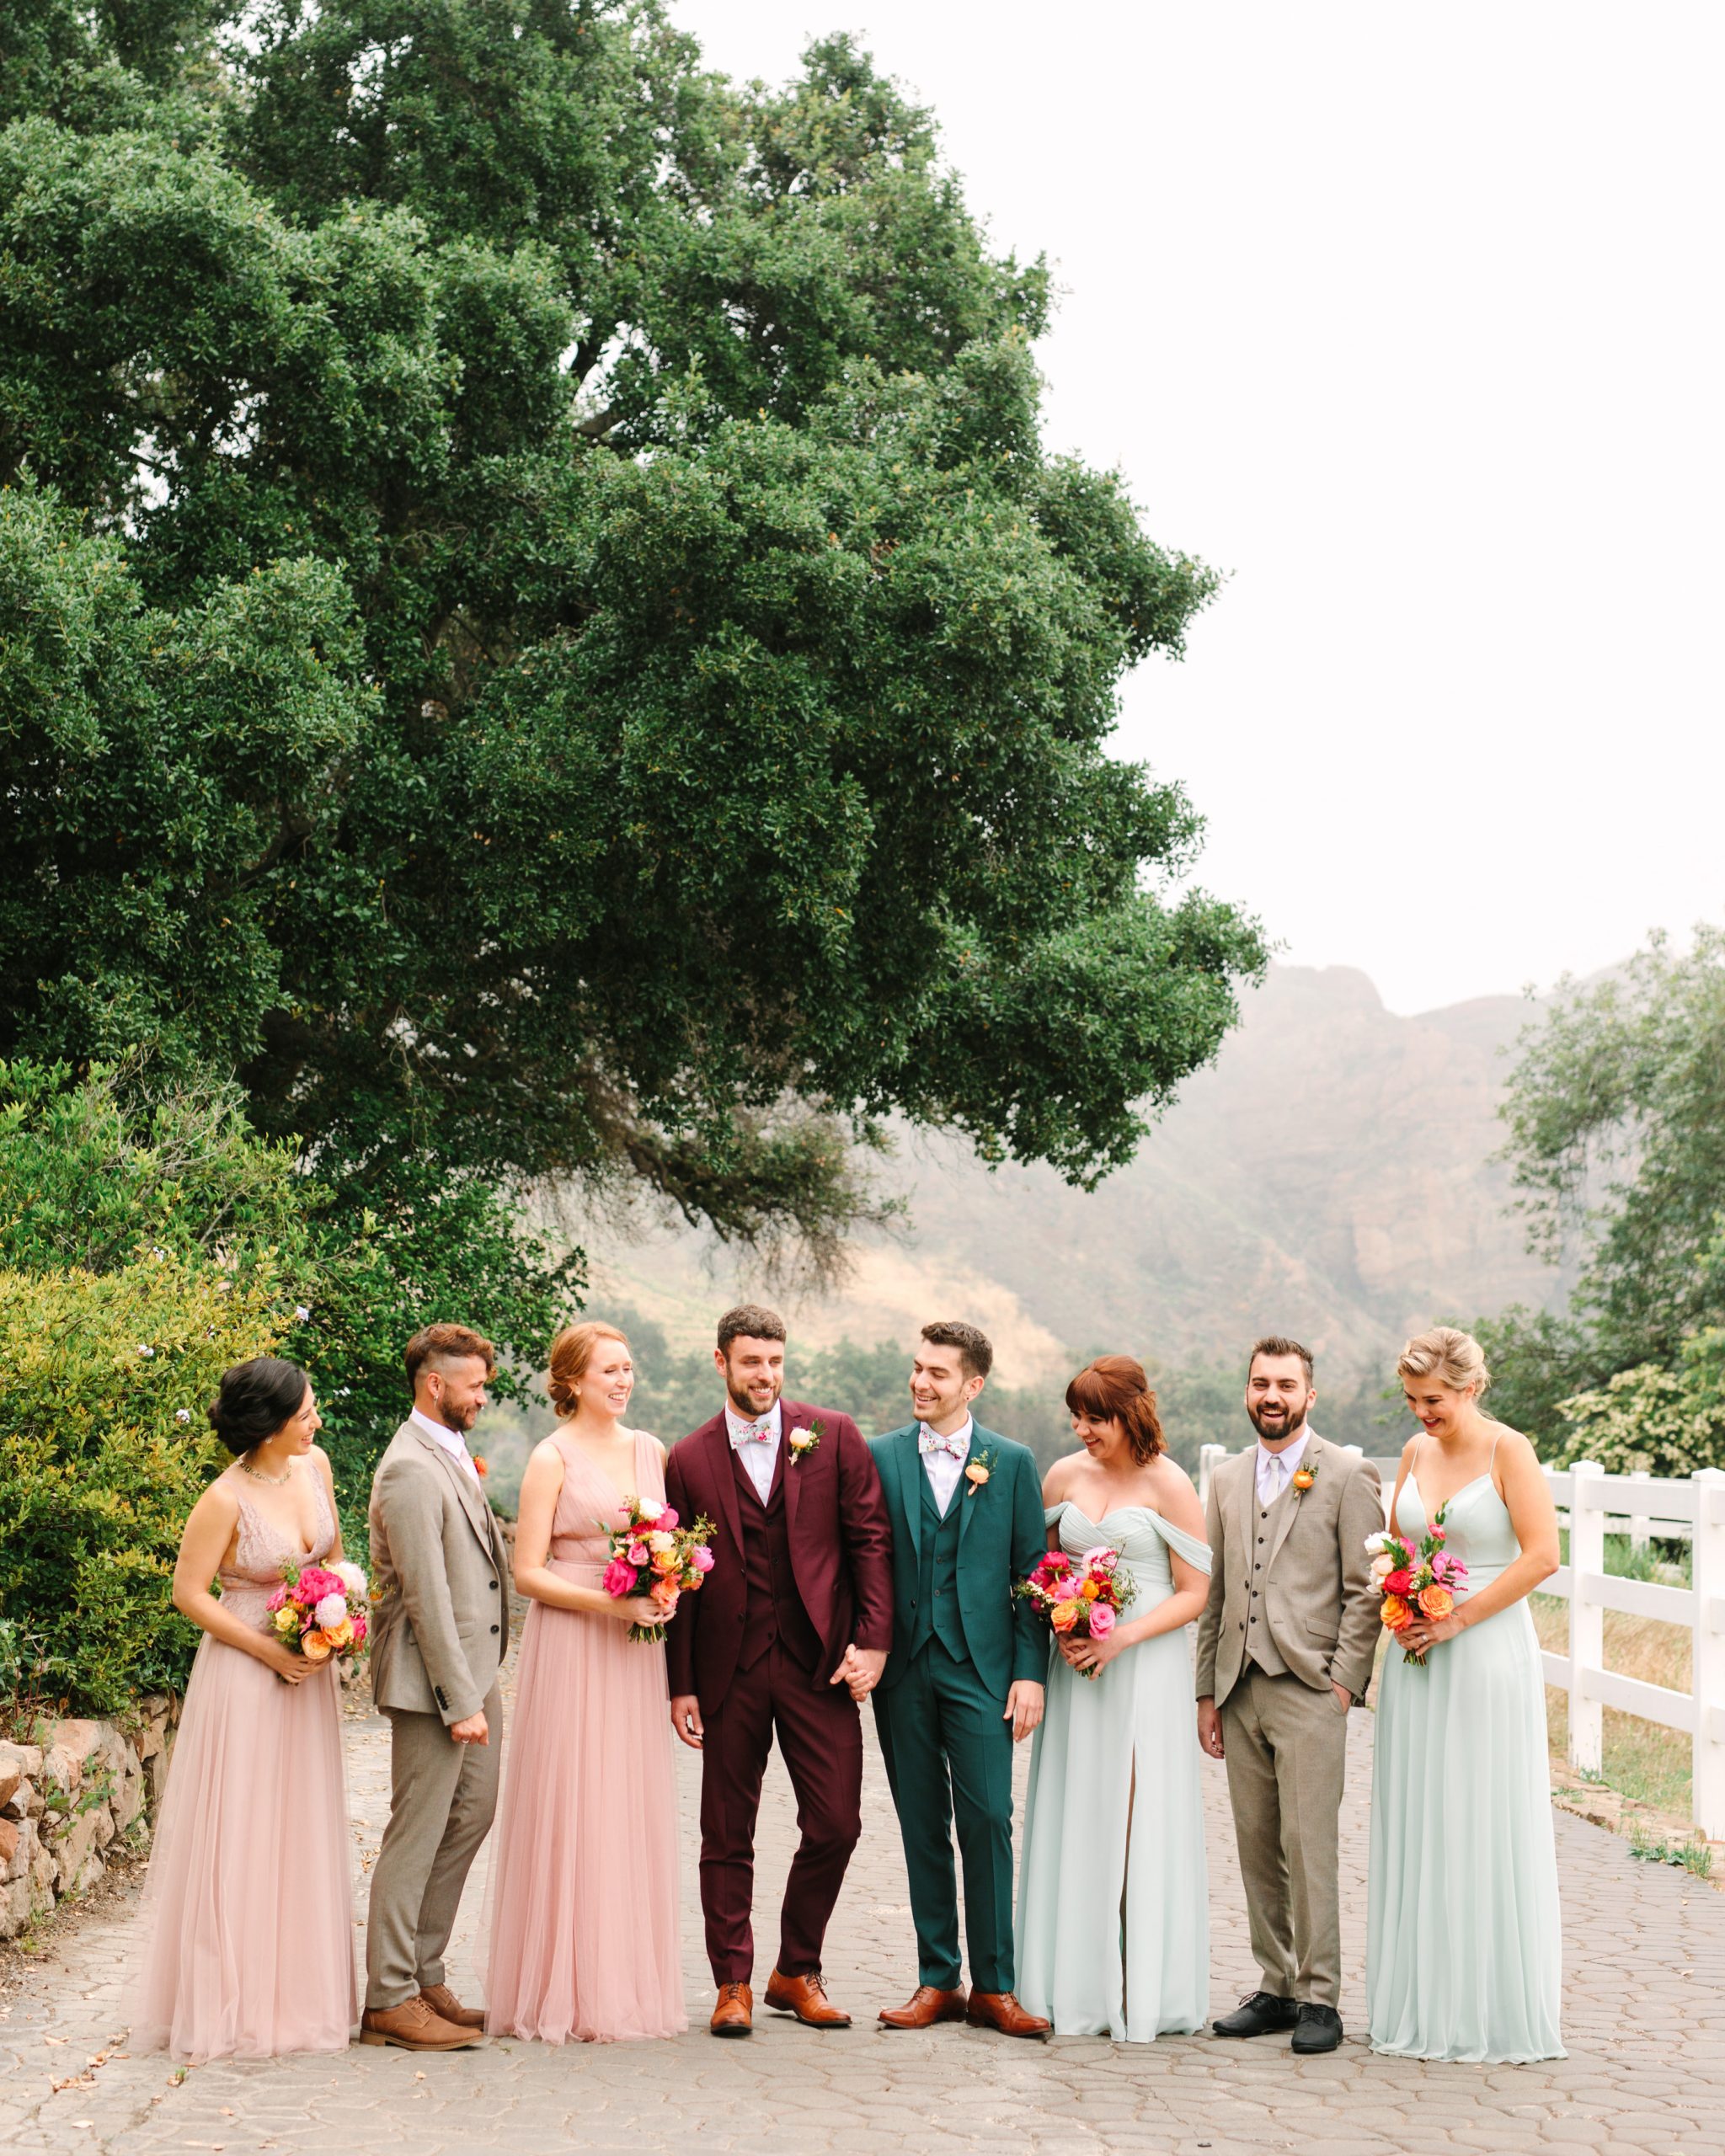 Stylish wedding party by Mary Costa Photography